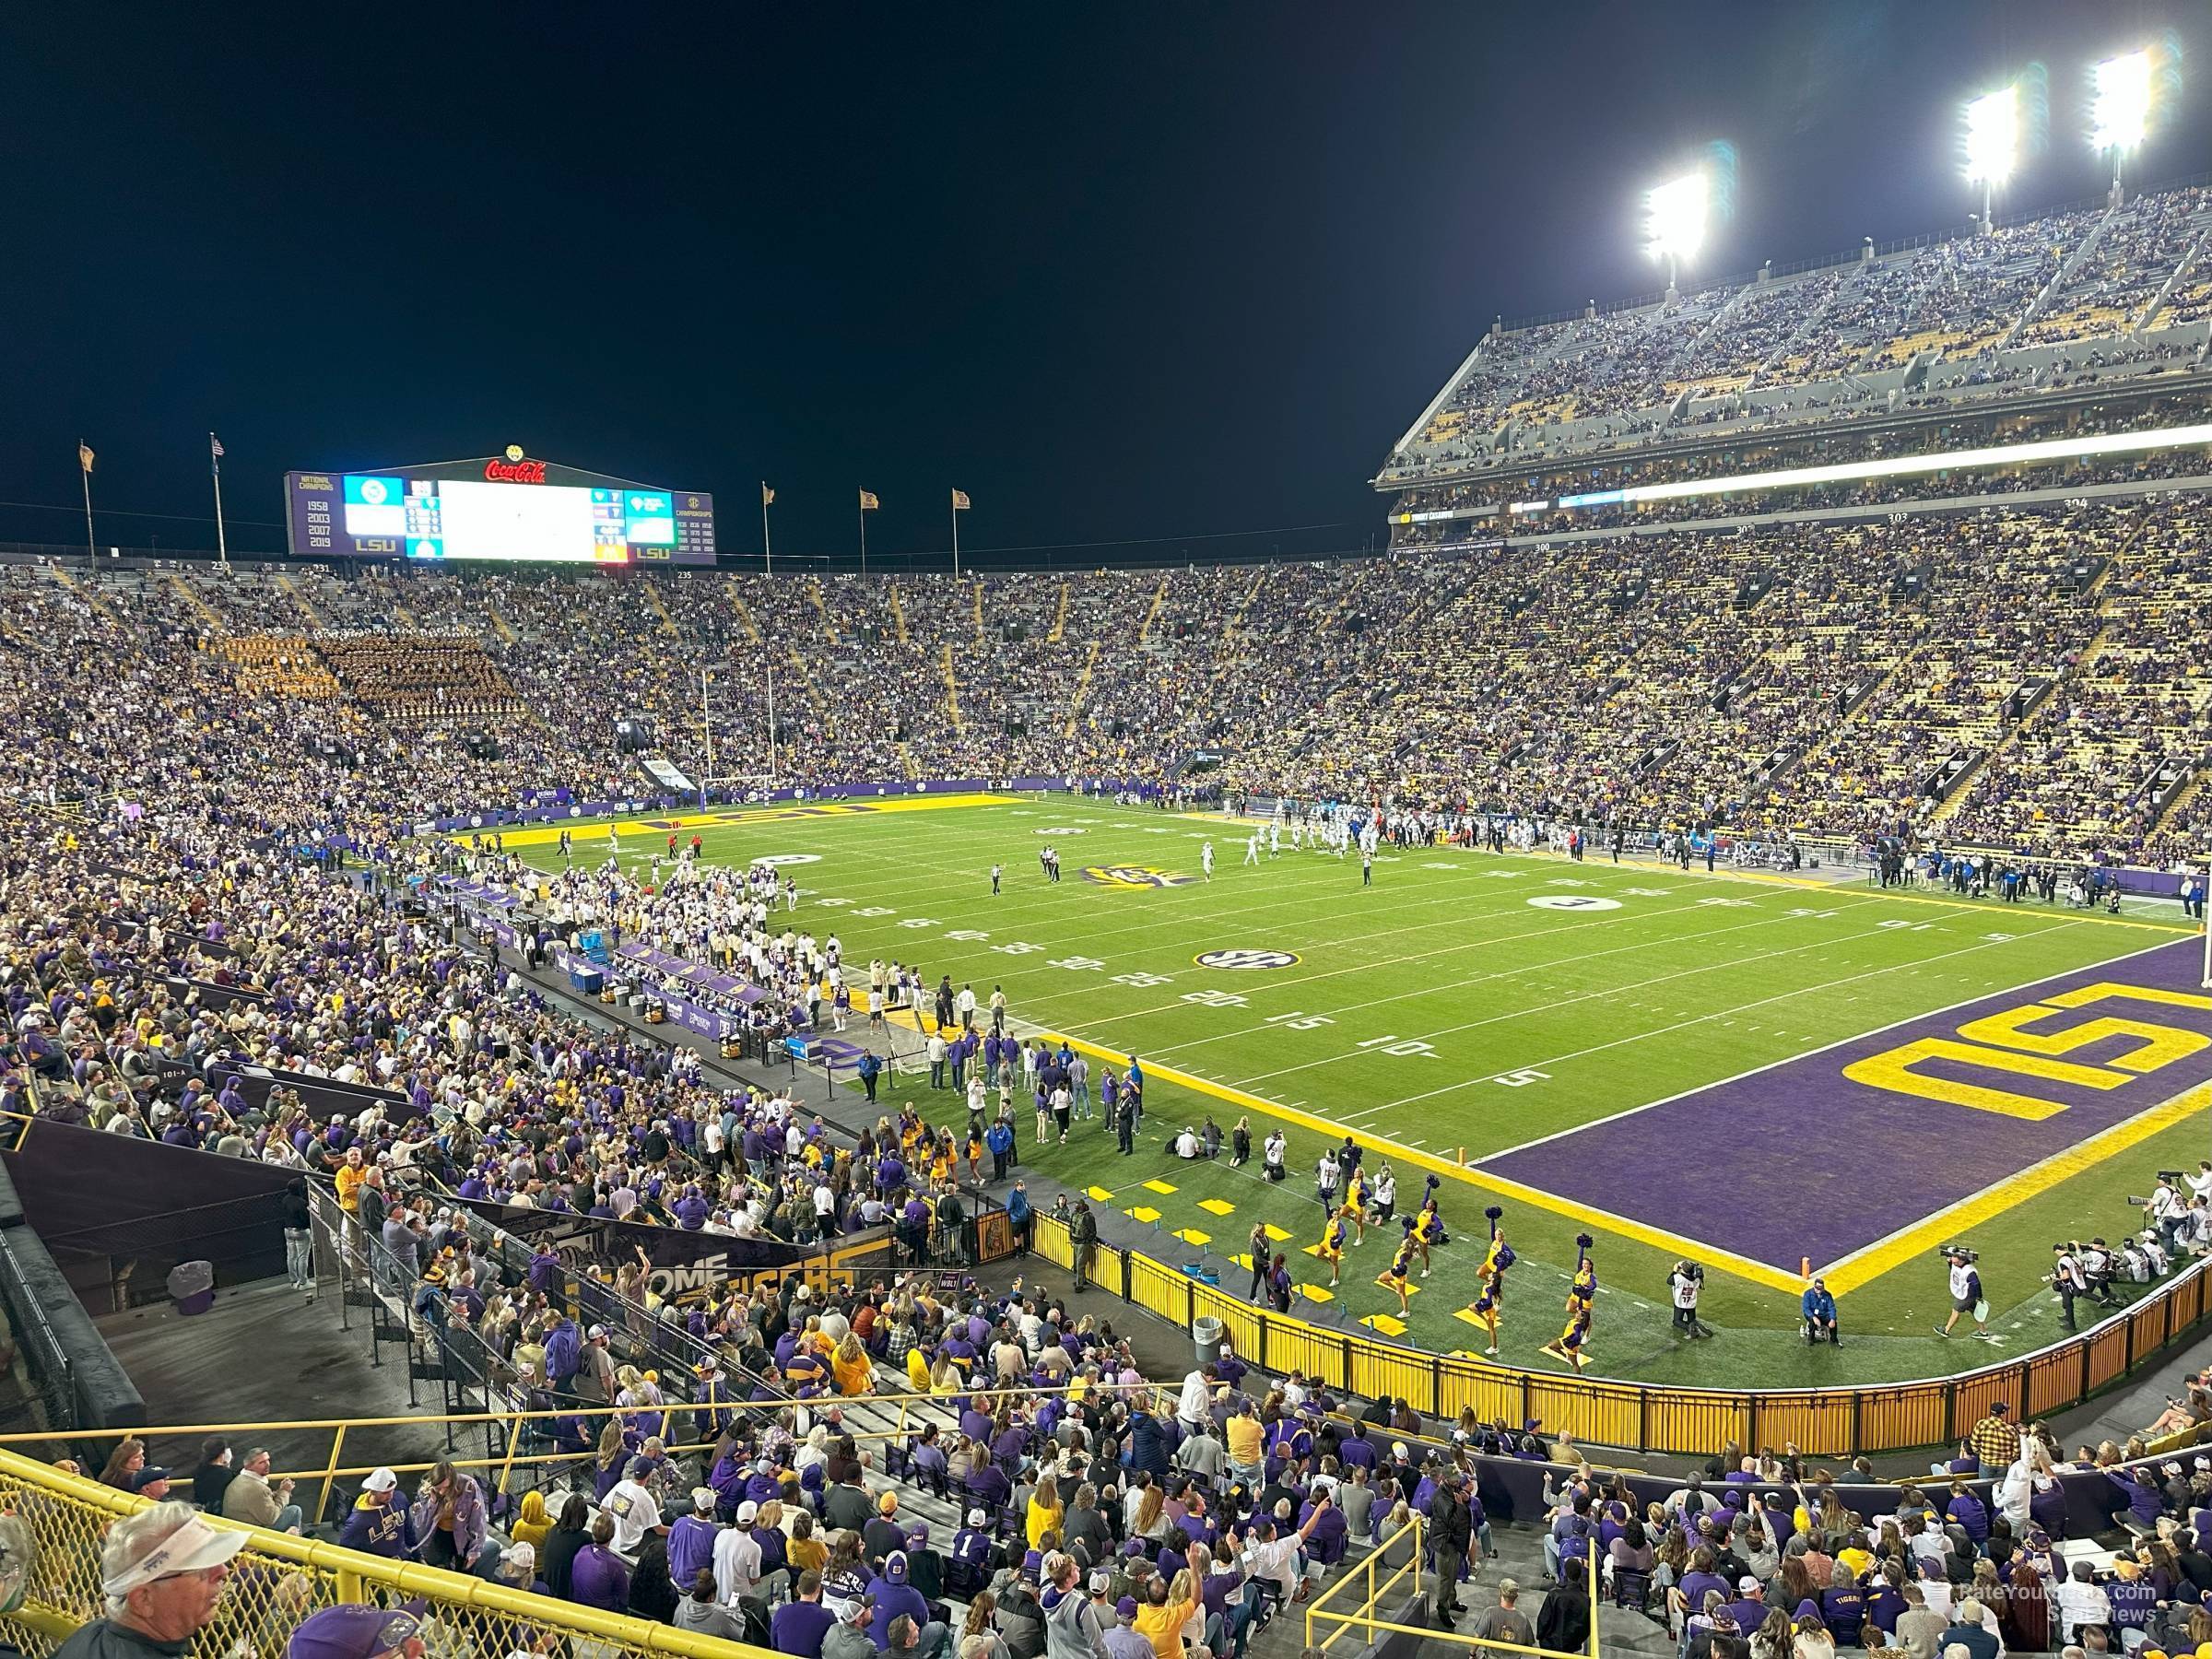 section 421, row 5  seat view  - tiger stadium